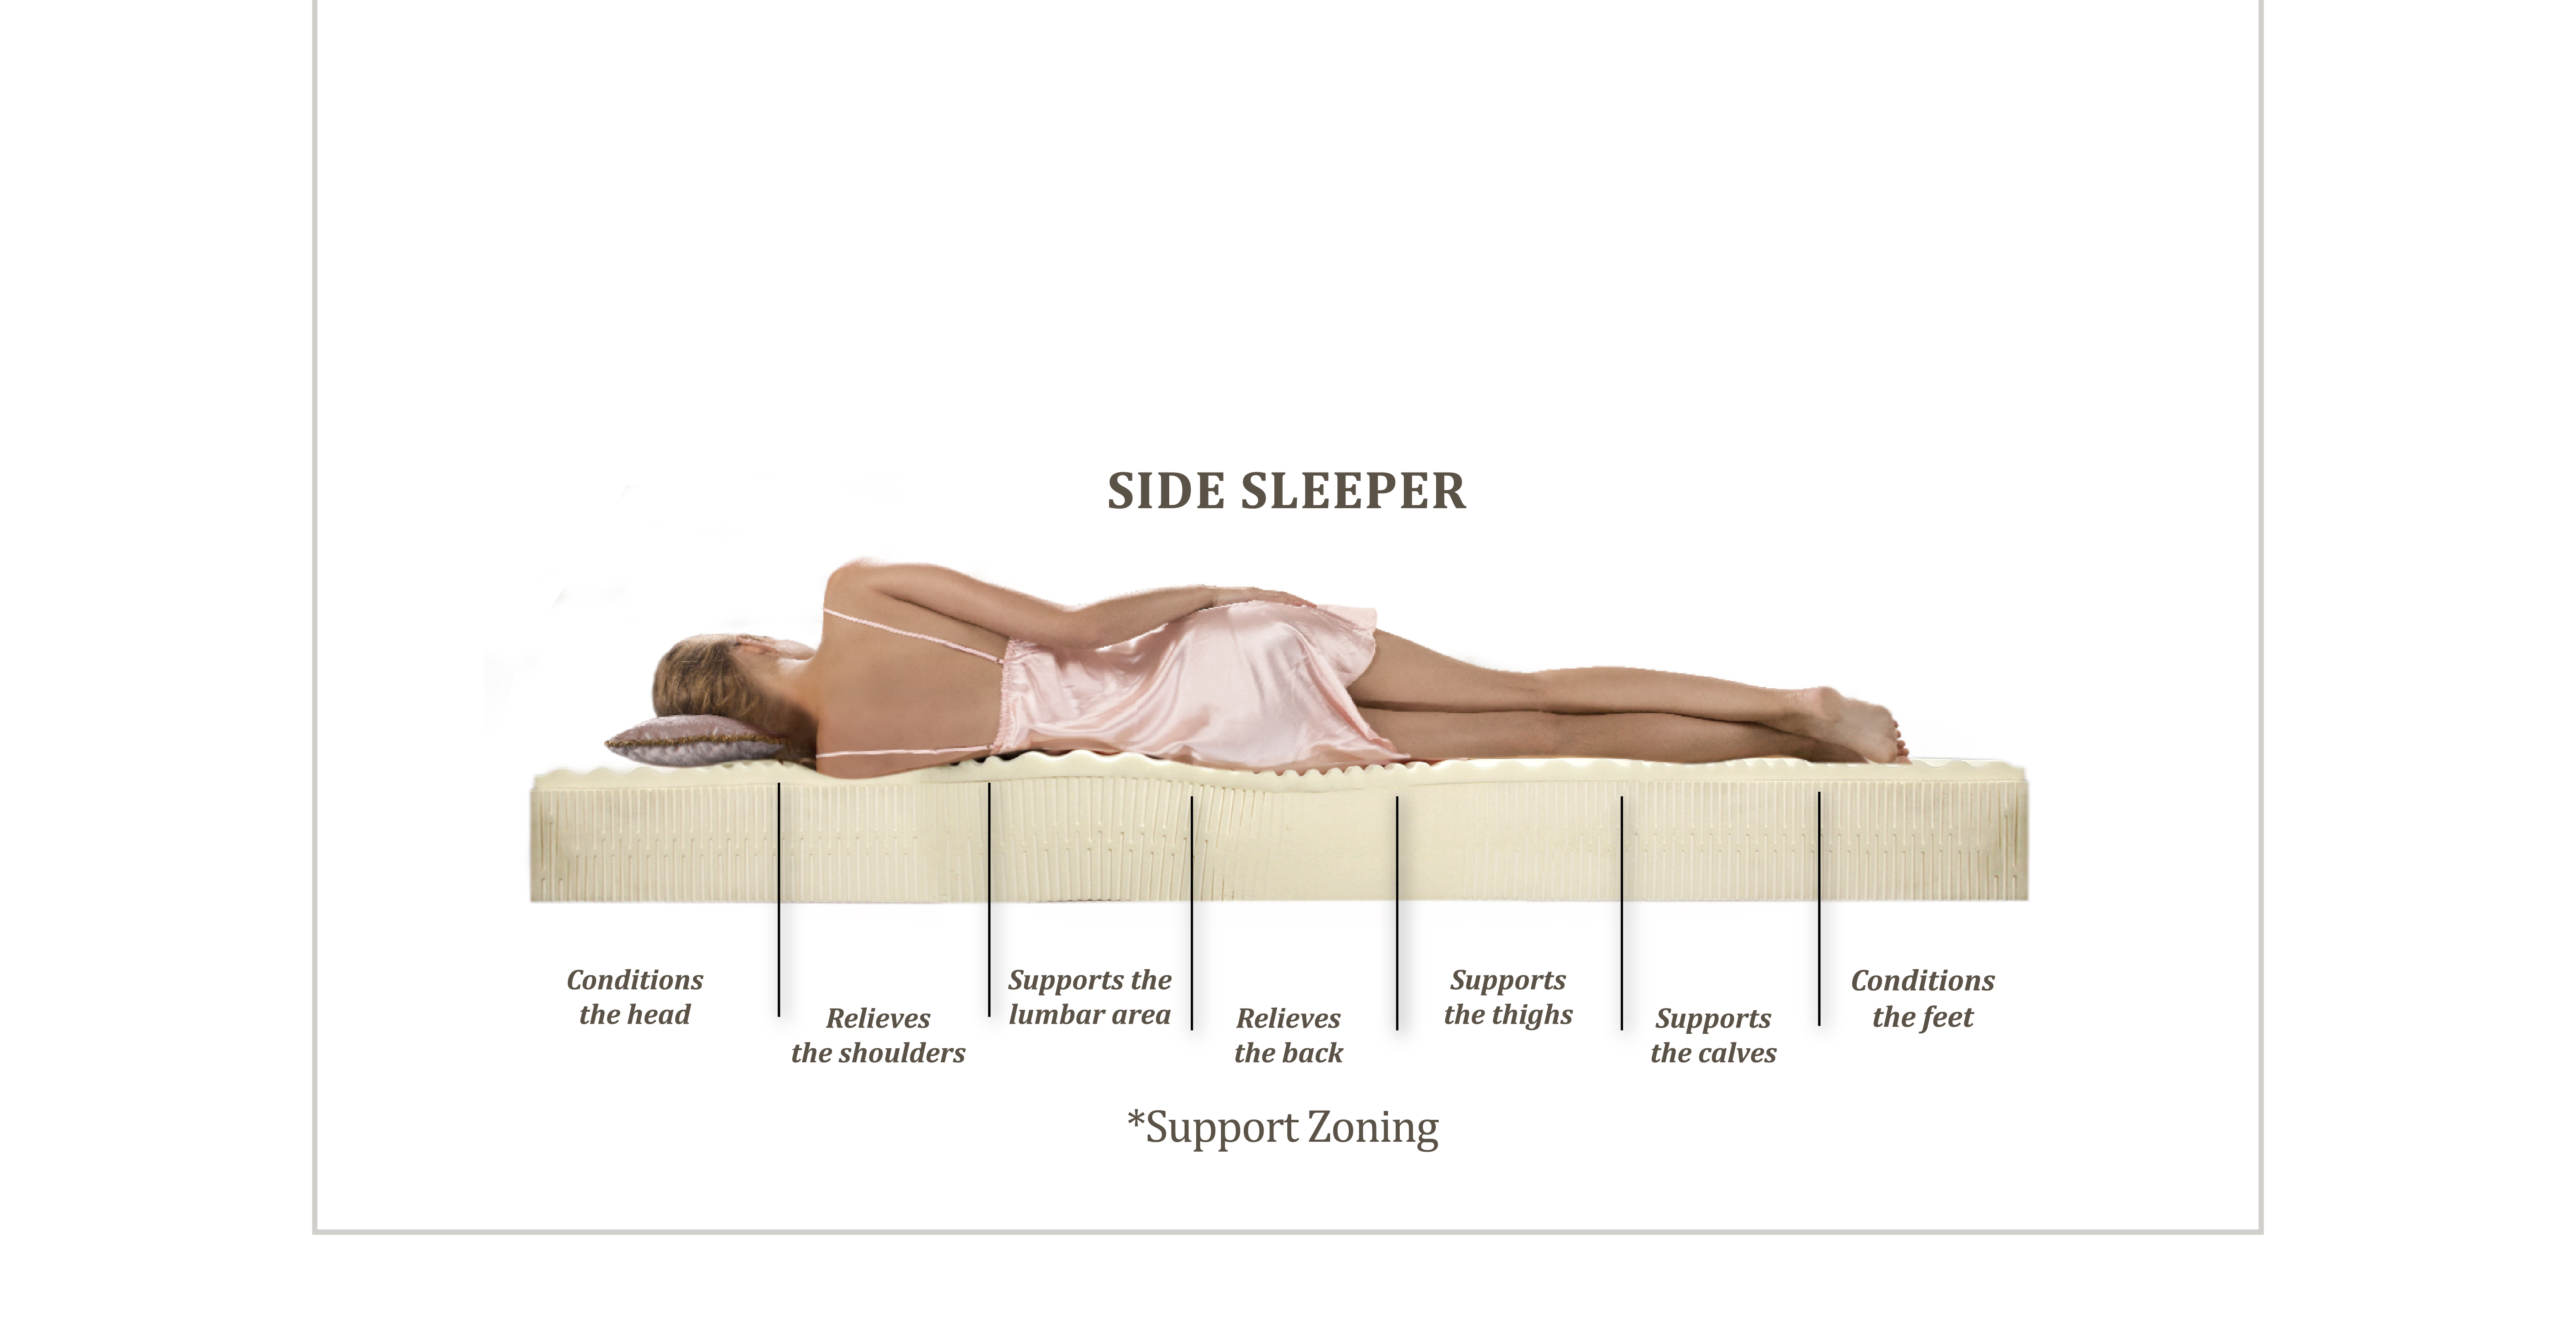 side sleeper princess collections